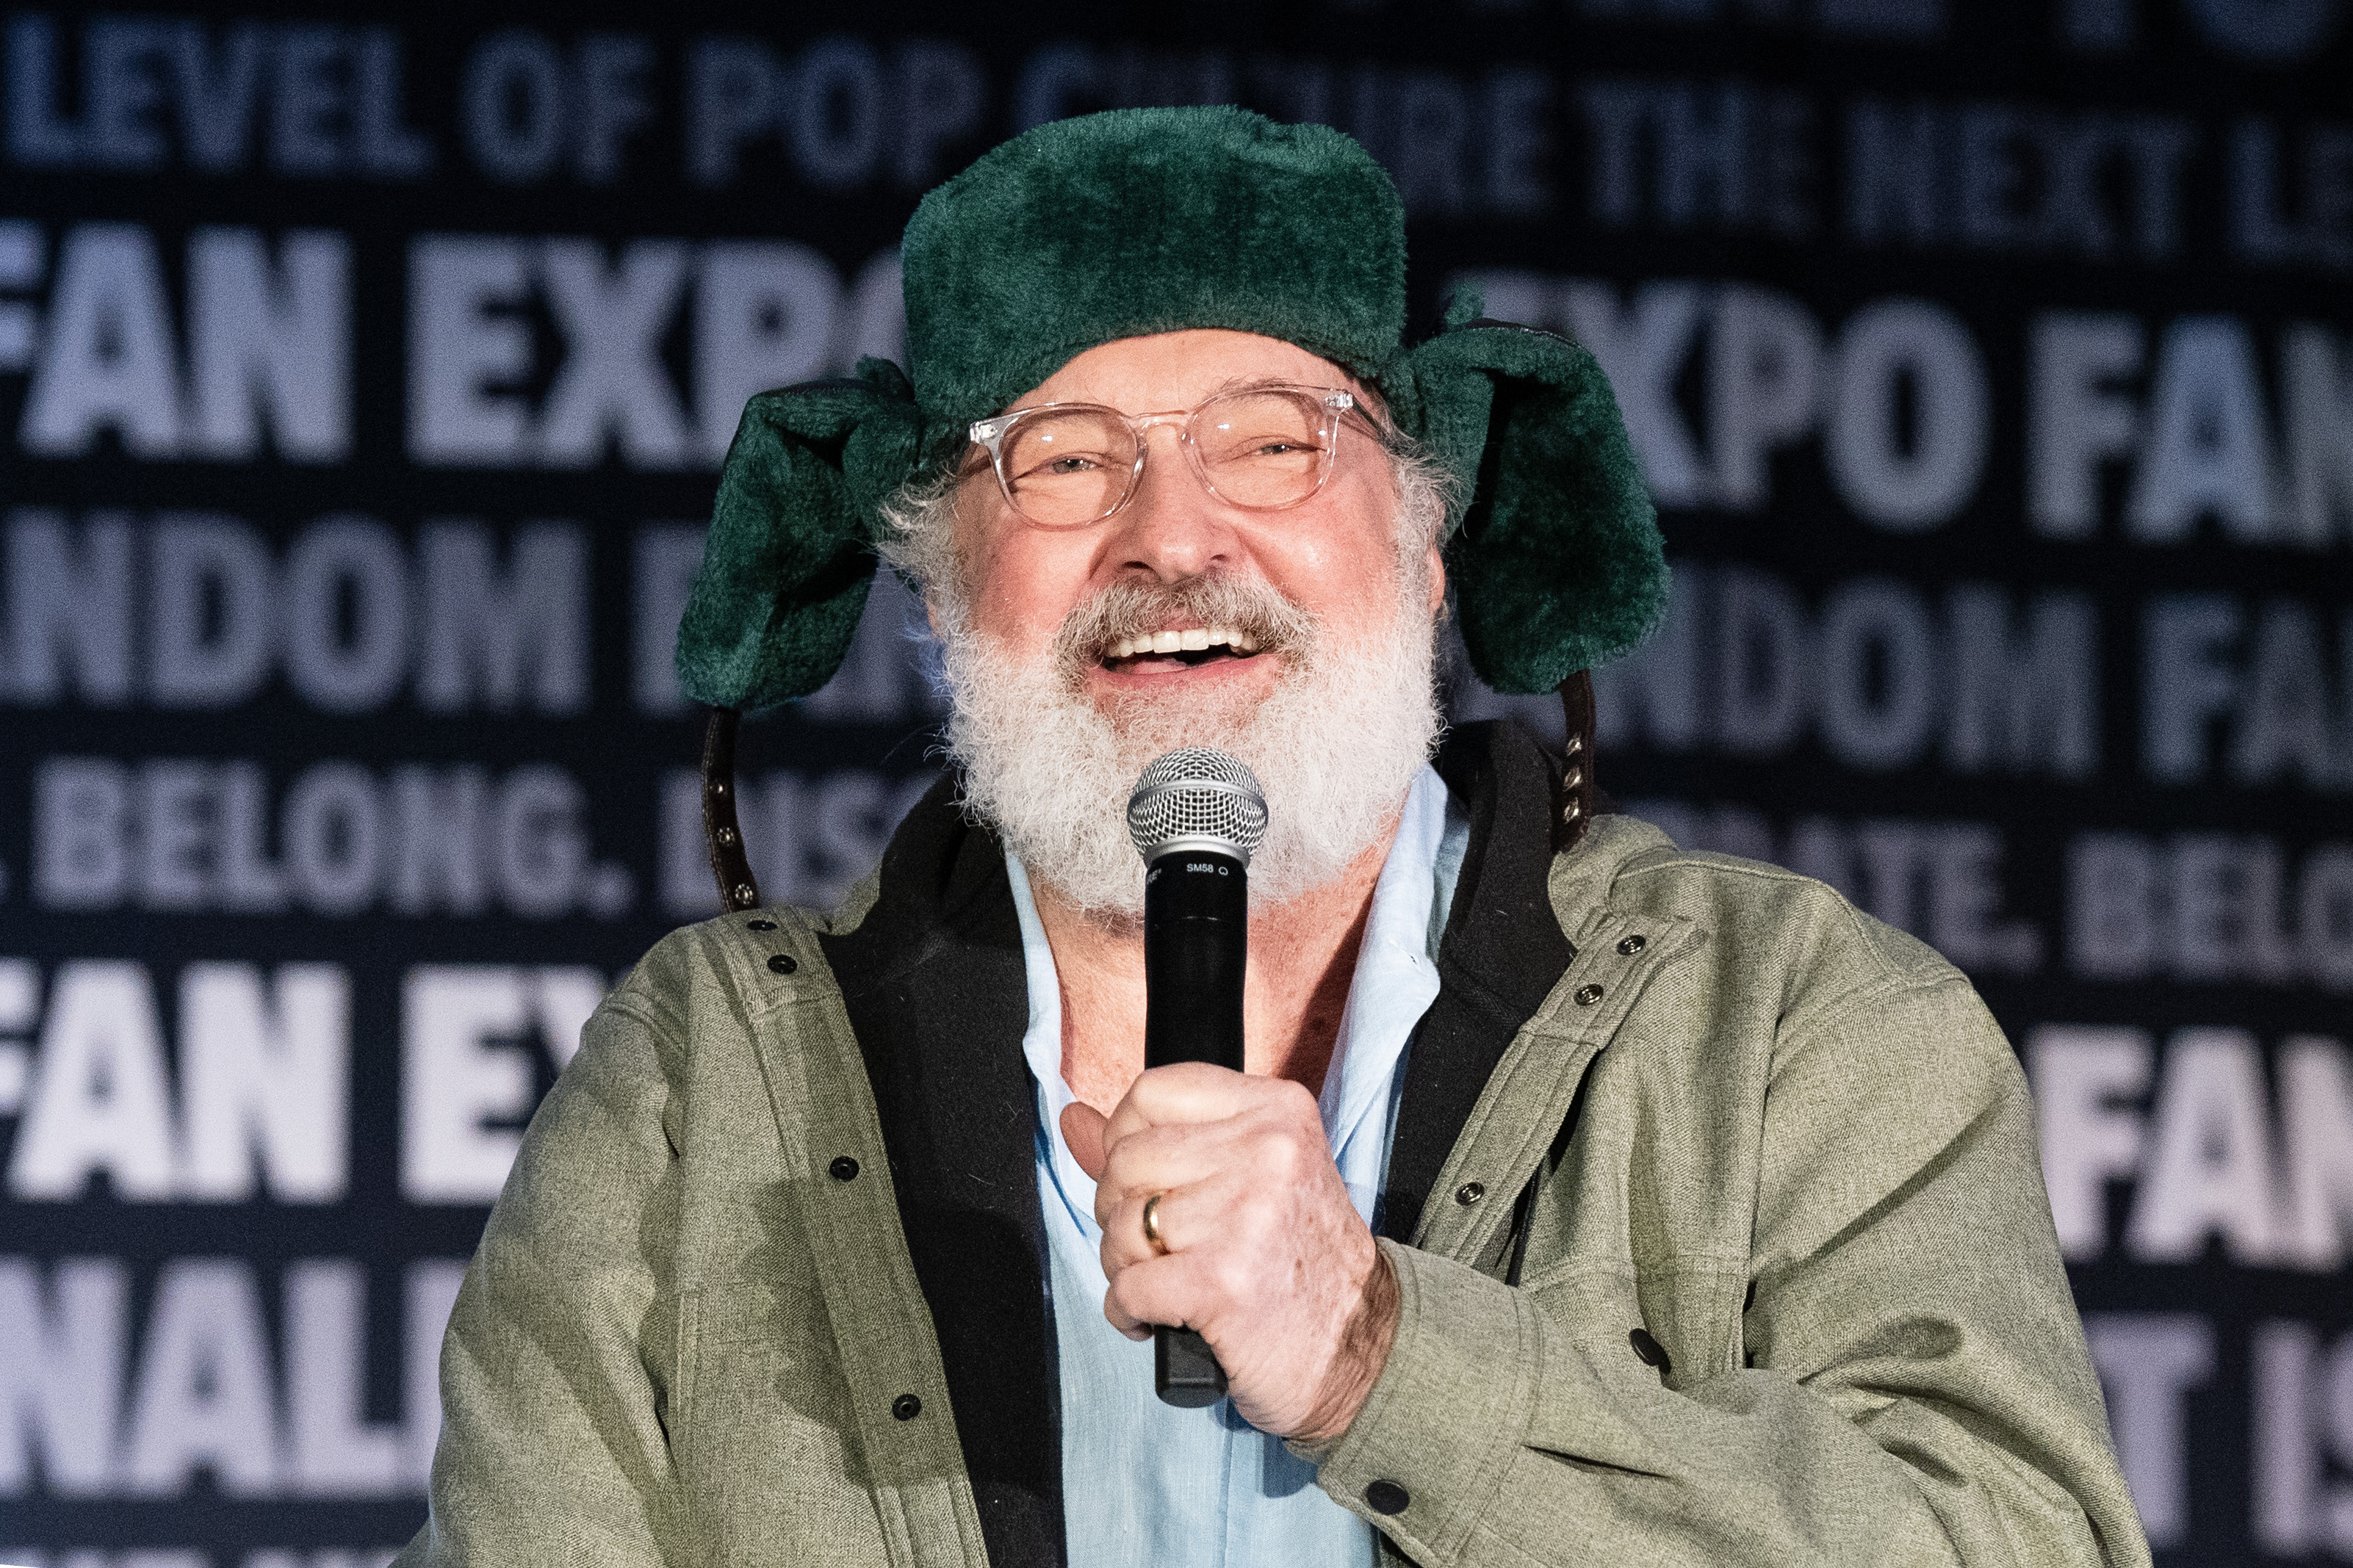 Randy onstage speaking into a microphone, wearing a whimsical hat with ear flaps